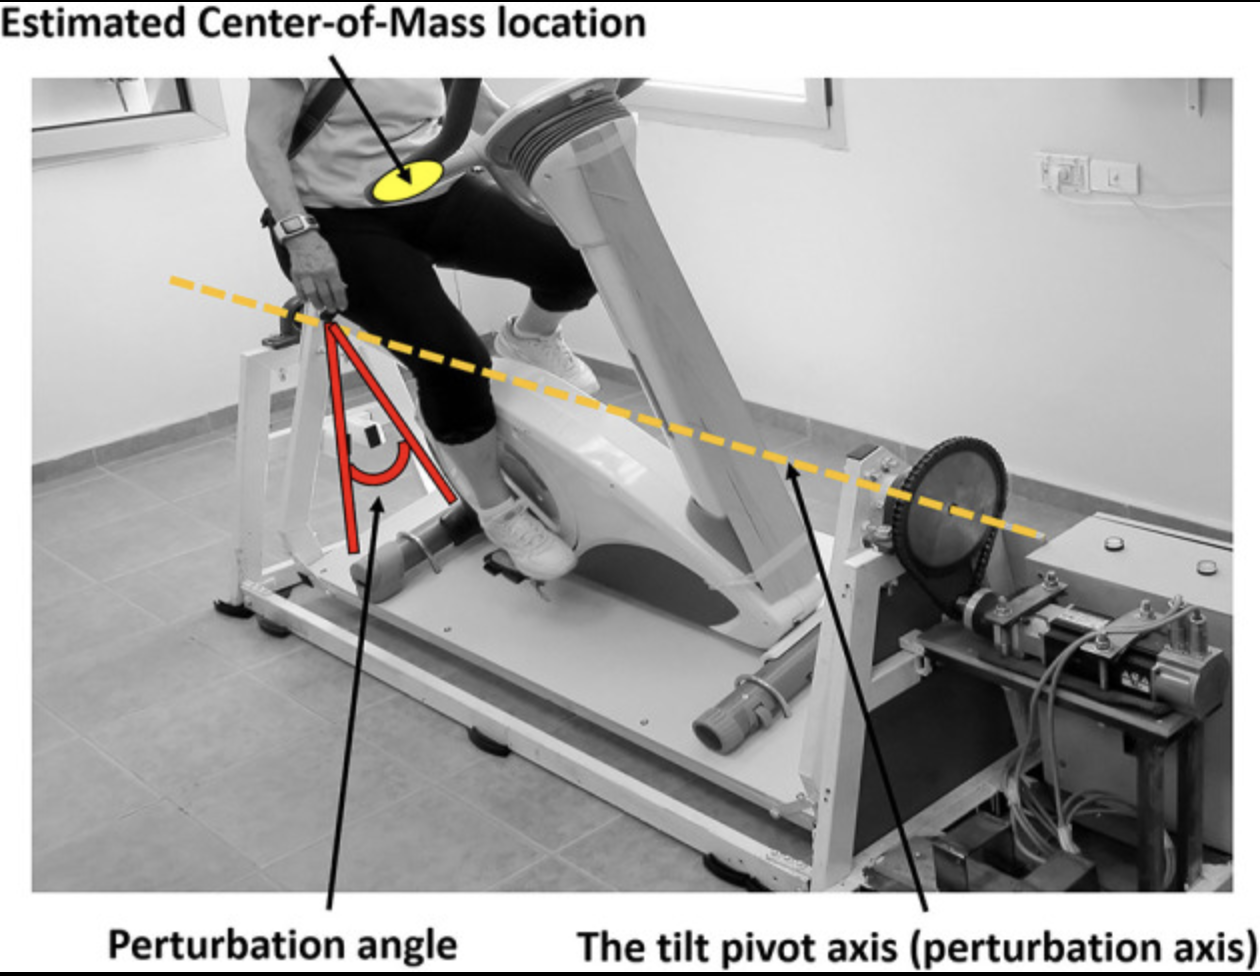 The Effects of Bicycle Simulator Training on Anticipatory and Compensatory Postural Control in Older Adults: Study Protocol for a Single-Blind Randomized Controlled Trial